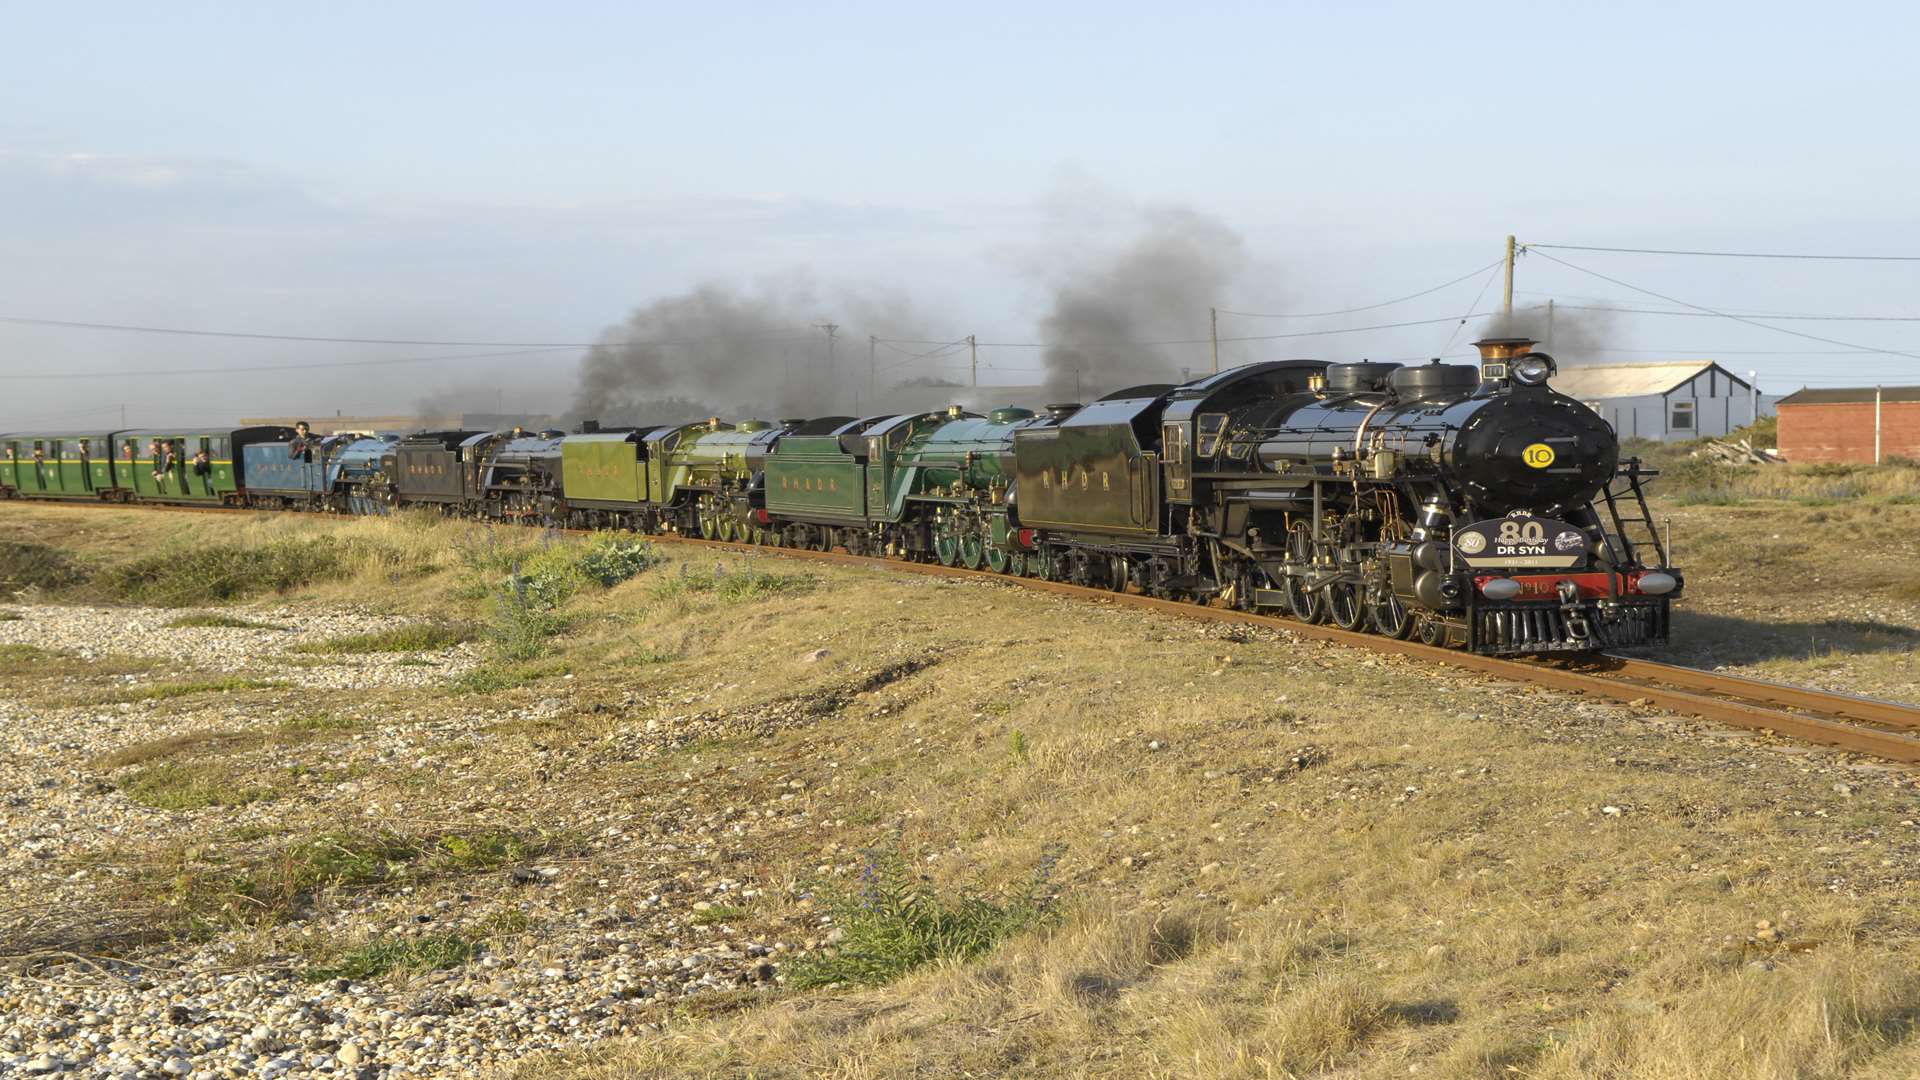 A train on the Dungeness, Romney, Hythe and Dymchurch Railway. Picture : Gary Browne